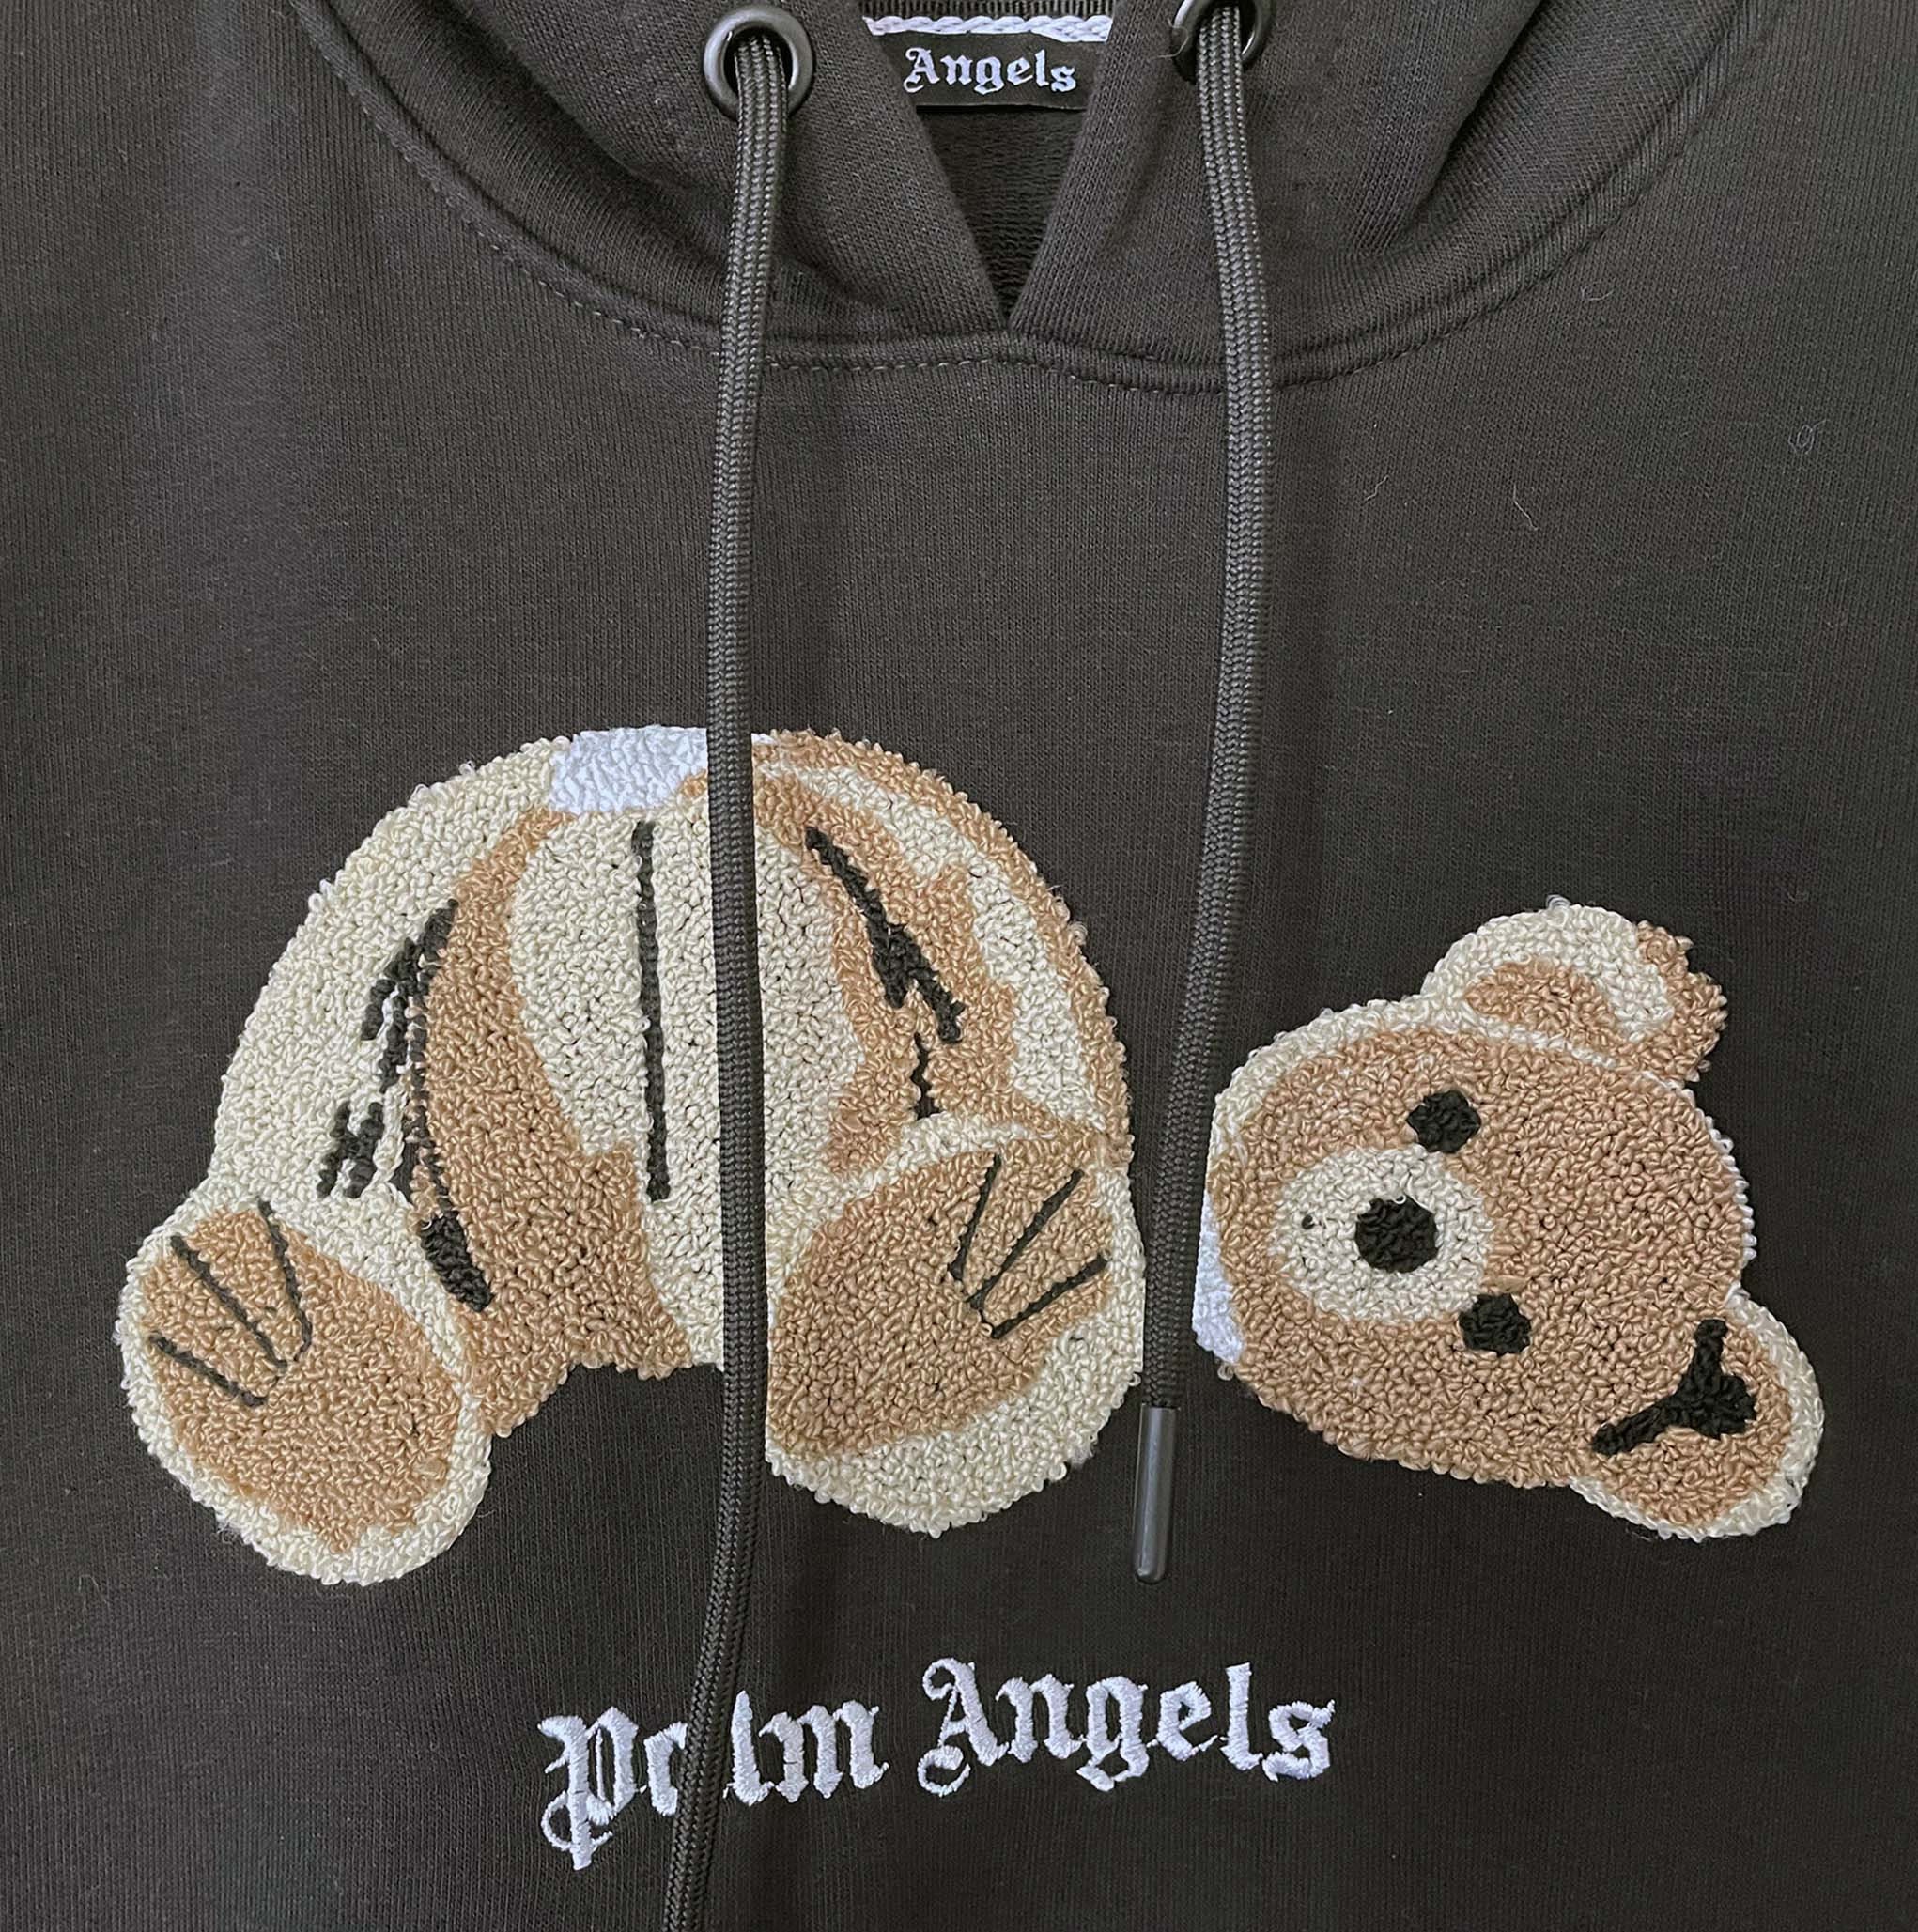 Vintage Palm Angels Hoodie With Torn Apart Bear Embroidery   Etsy